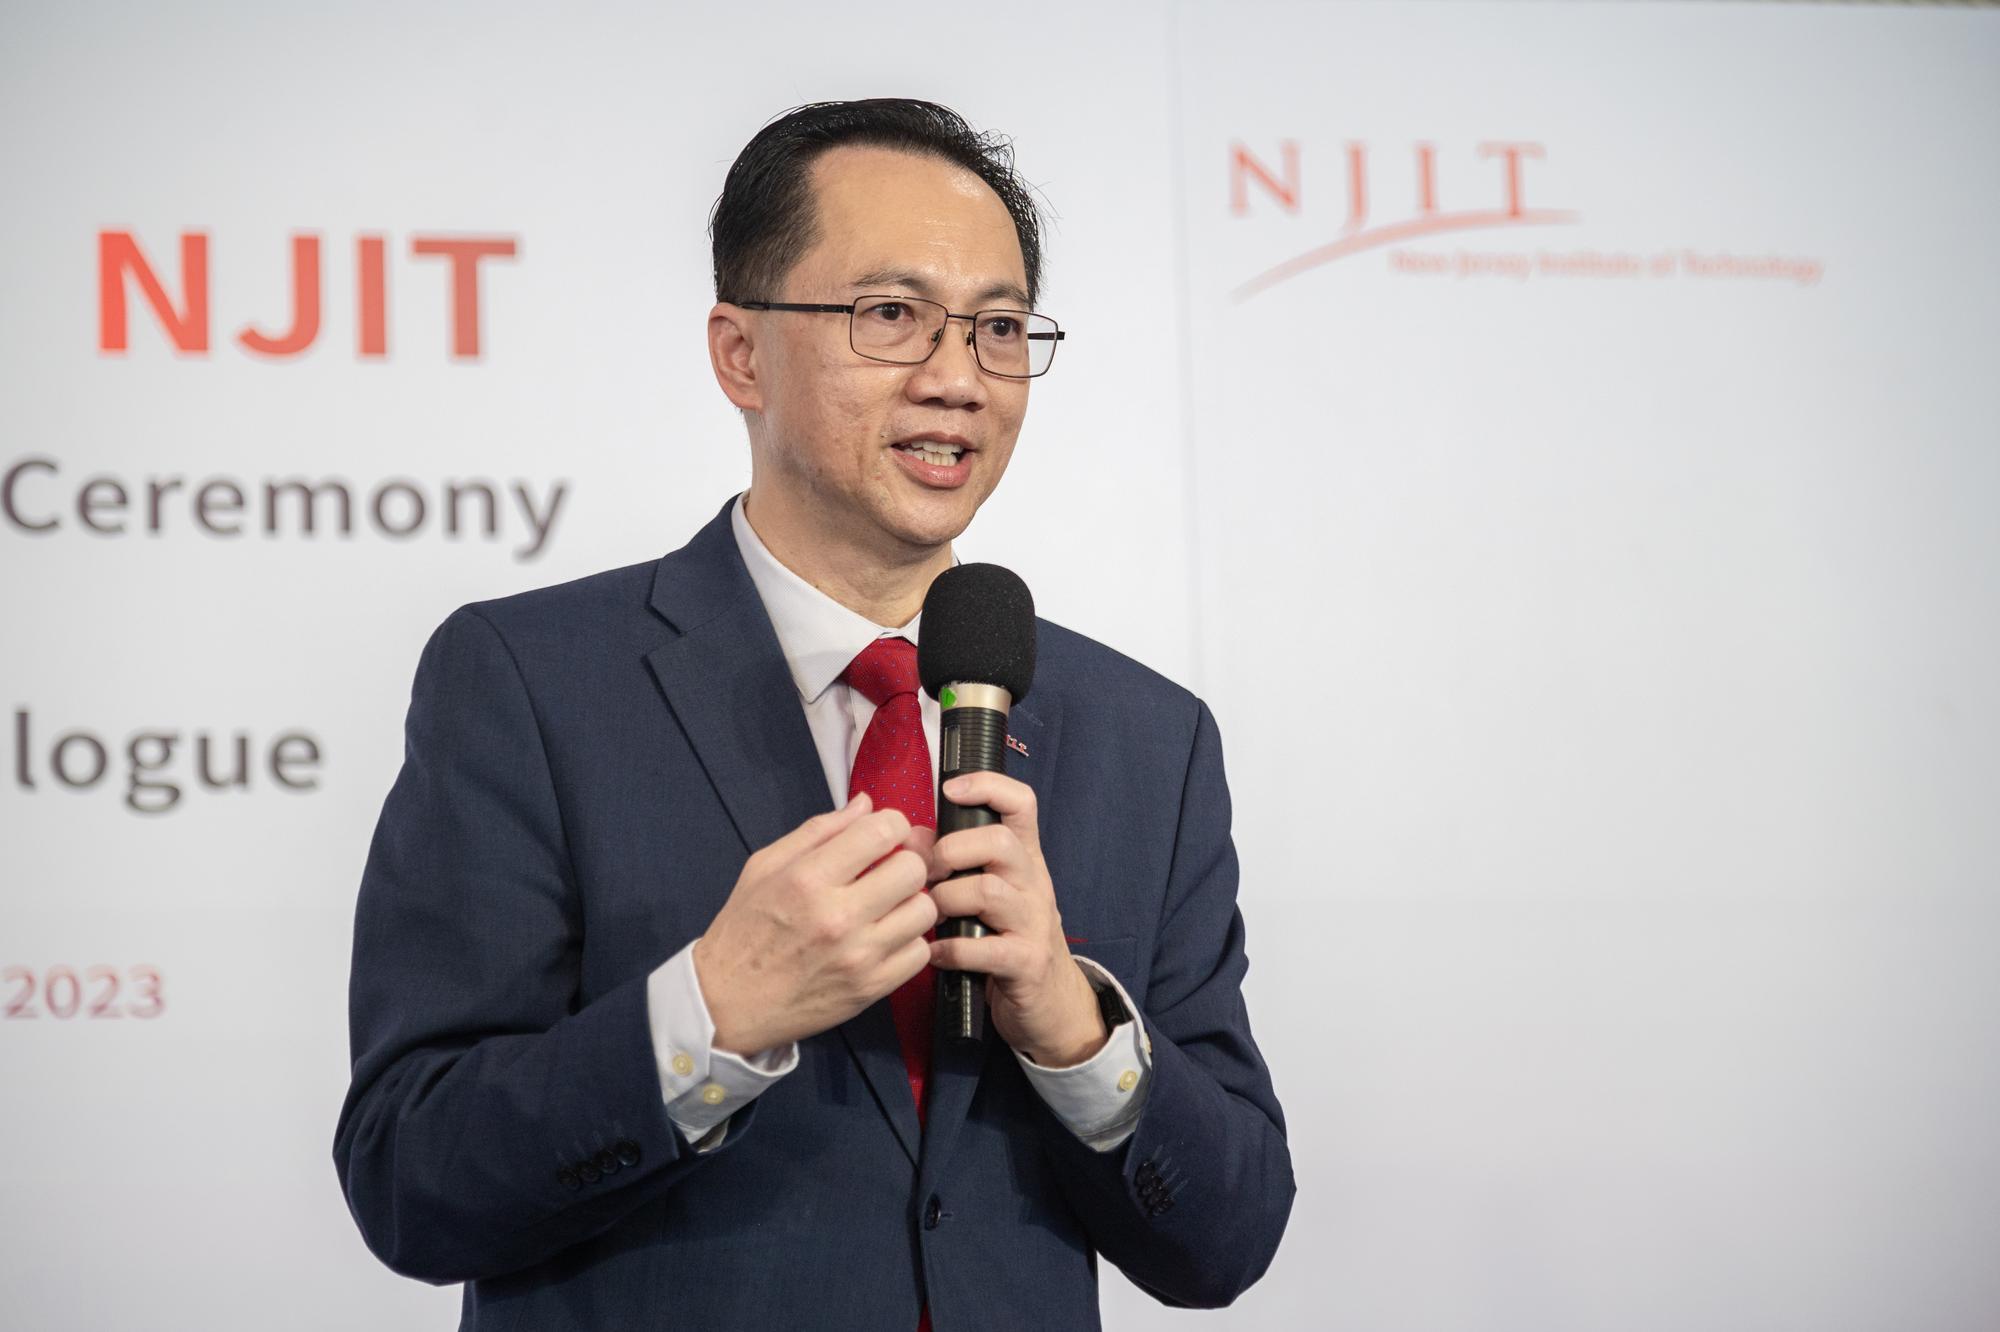 Teik C. Lim said that the location of NJIT helps open doors for students when it comes time to graduate.